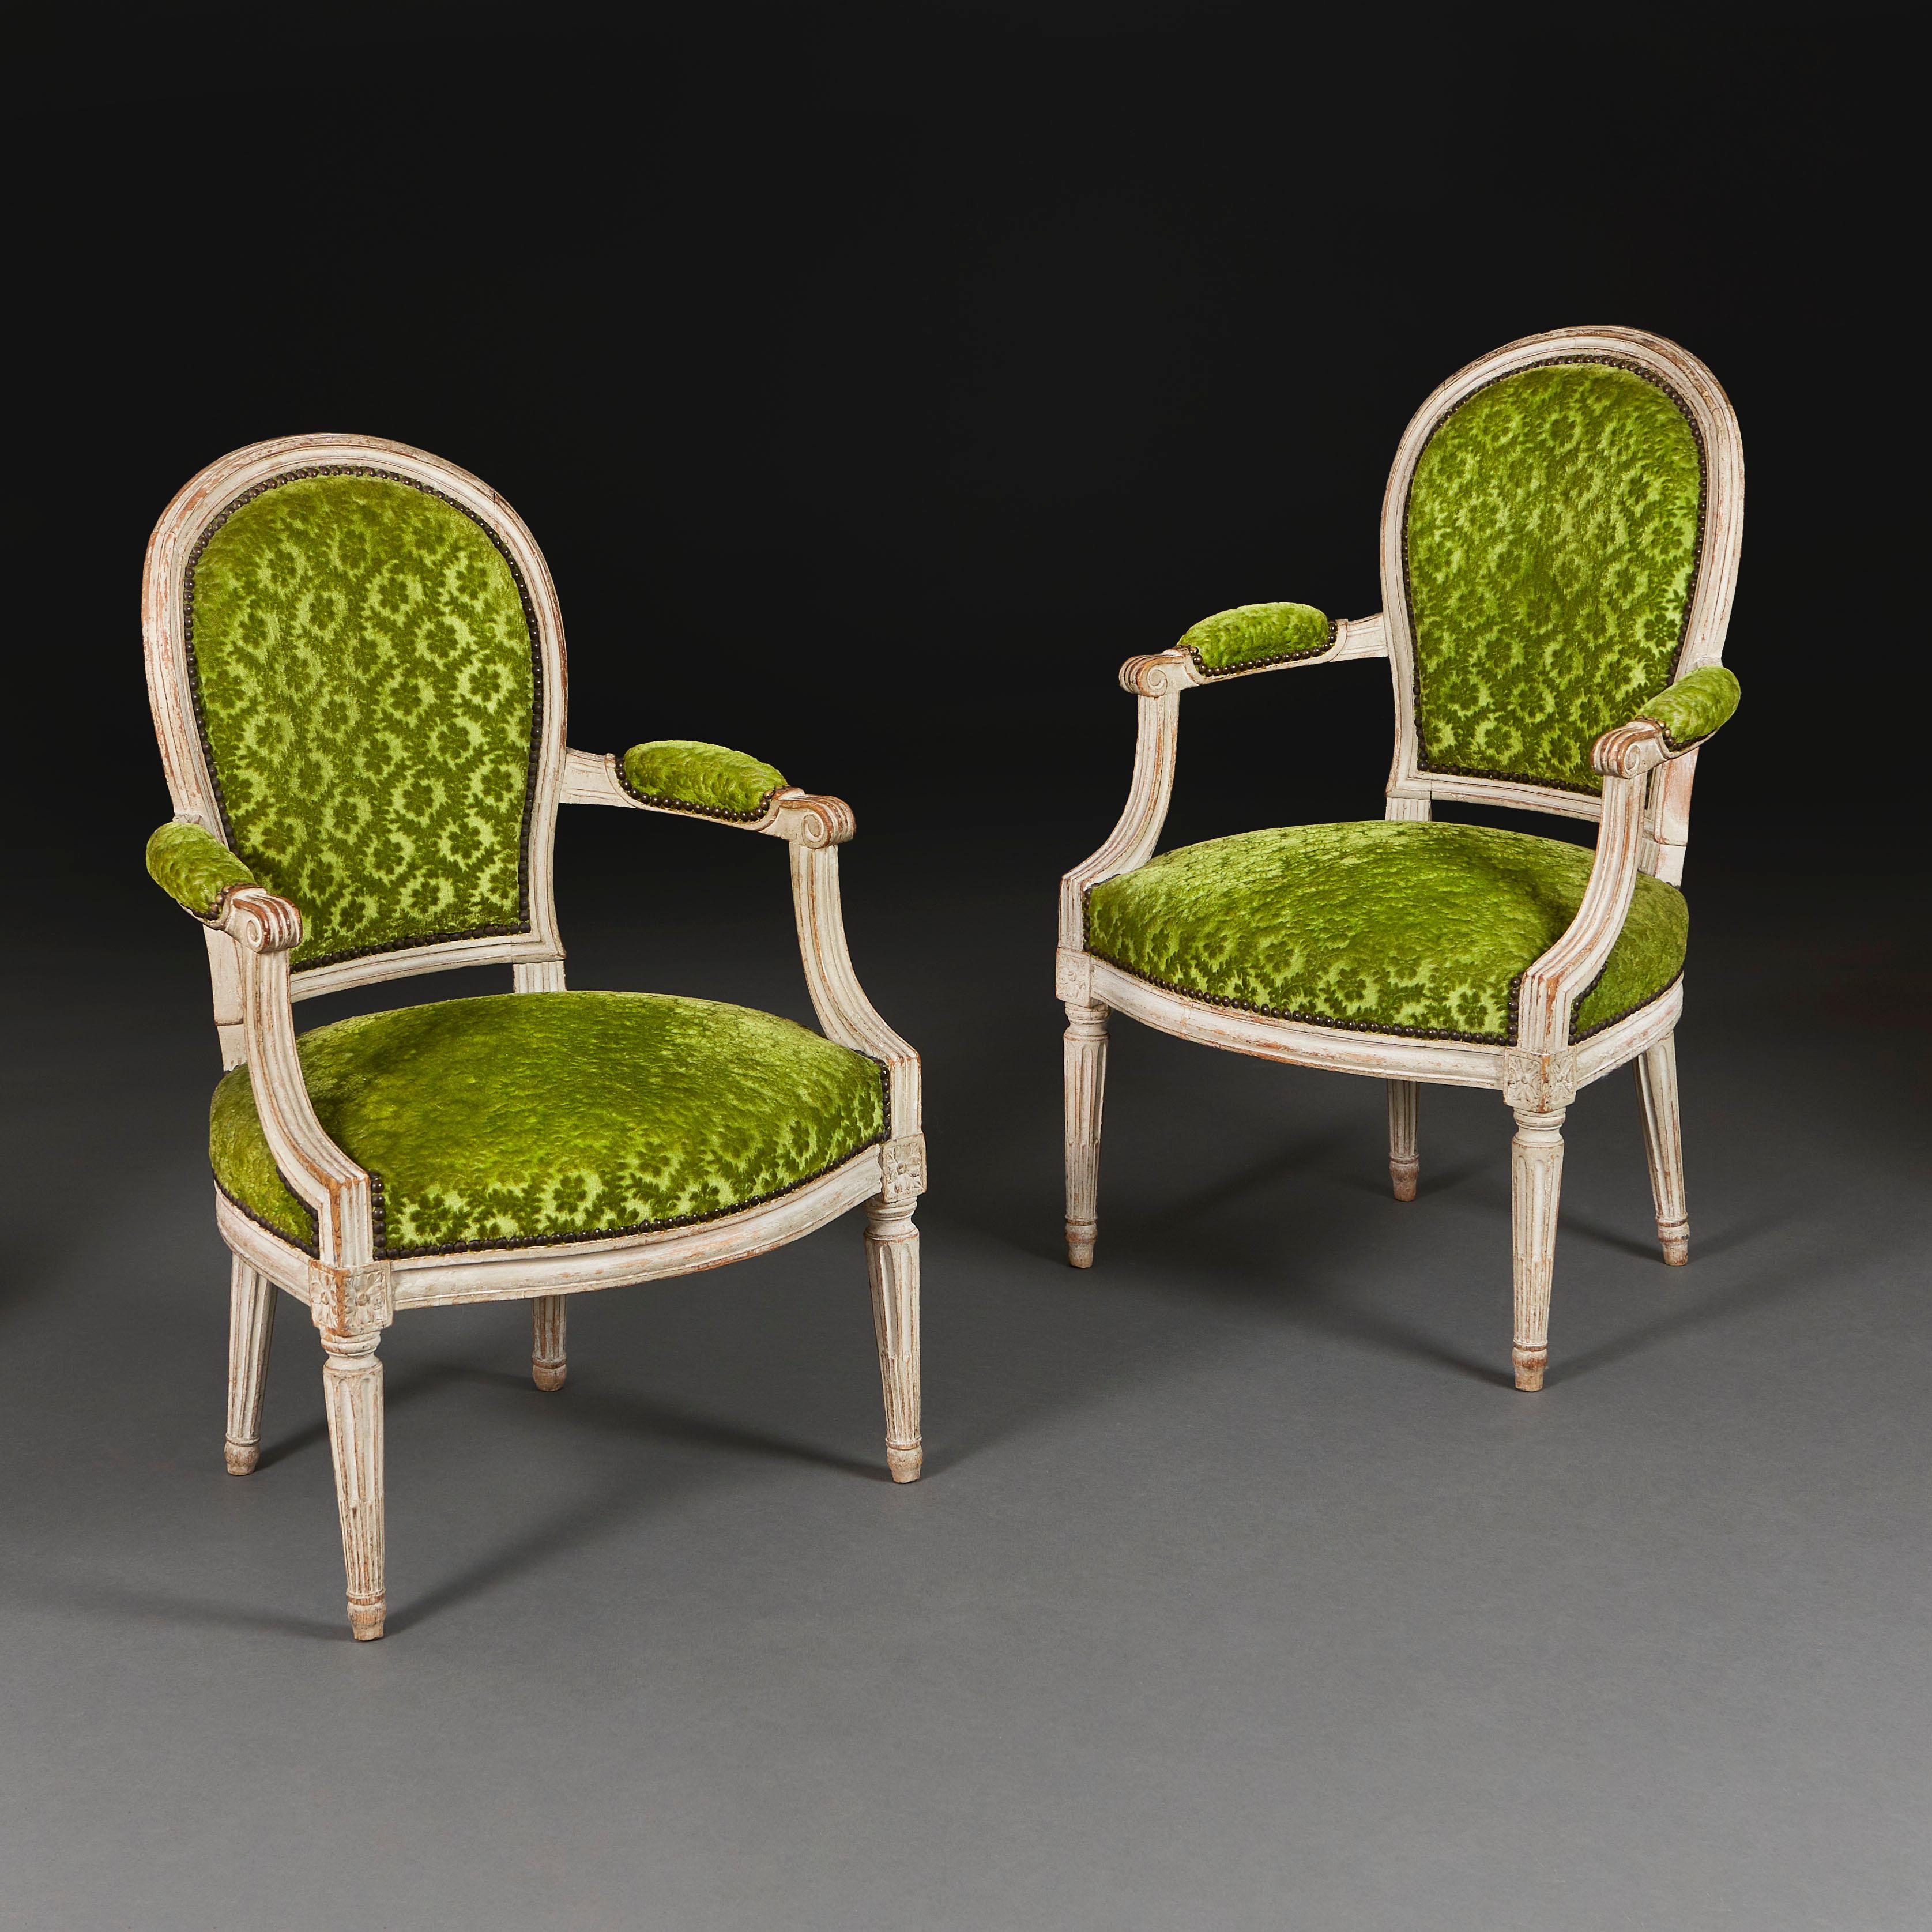 France, circa 1780

A pair of late eighteenth century painted fauteuils, with oval backs and seats, upholstered in striking nineteenth century apple green cut velvet, all supported on fluted tapering legs.

Height 87.00cm
Width 58.00cm
Depth